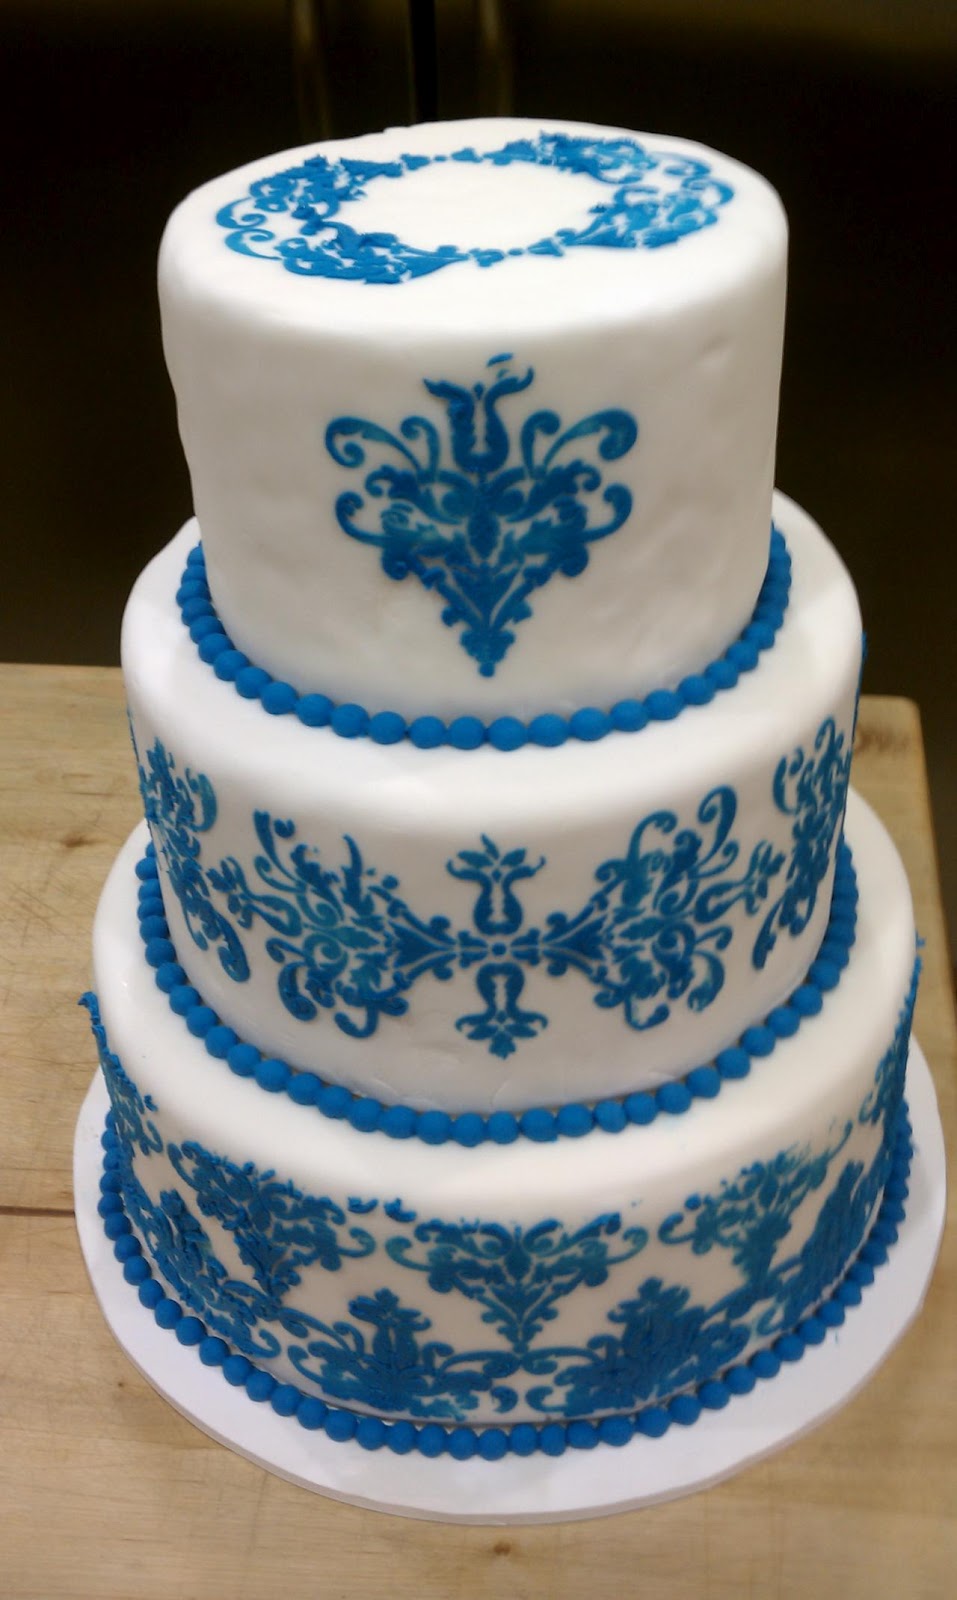  Wedding  Cakes  Pictures Blue  and White Wedding  Cakes 